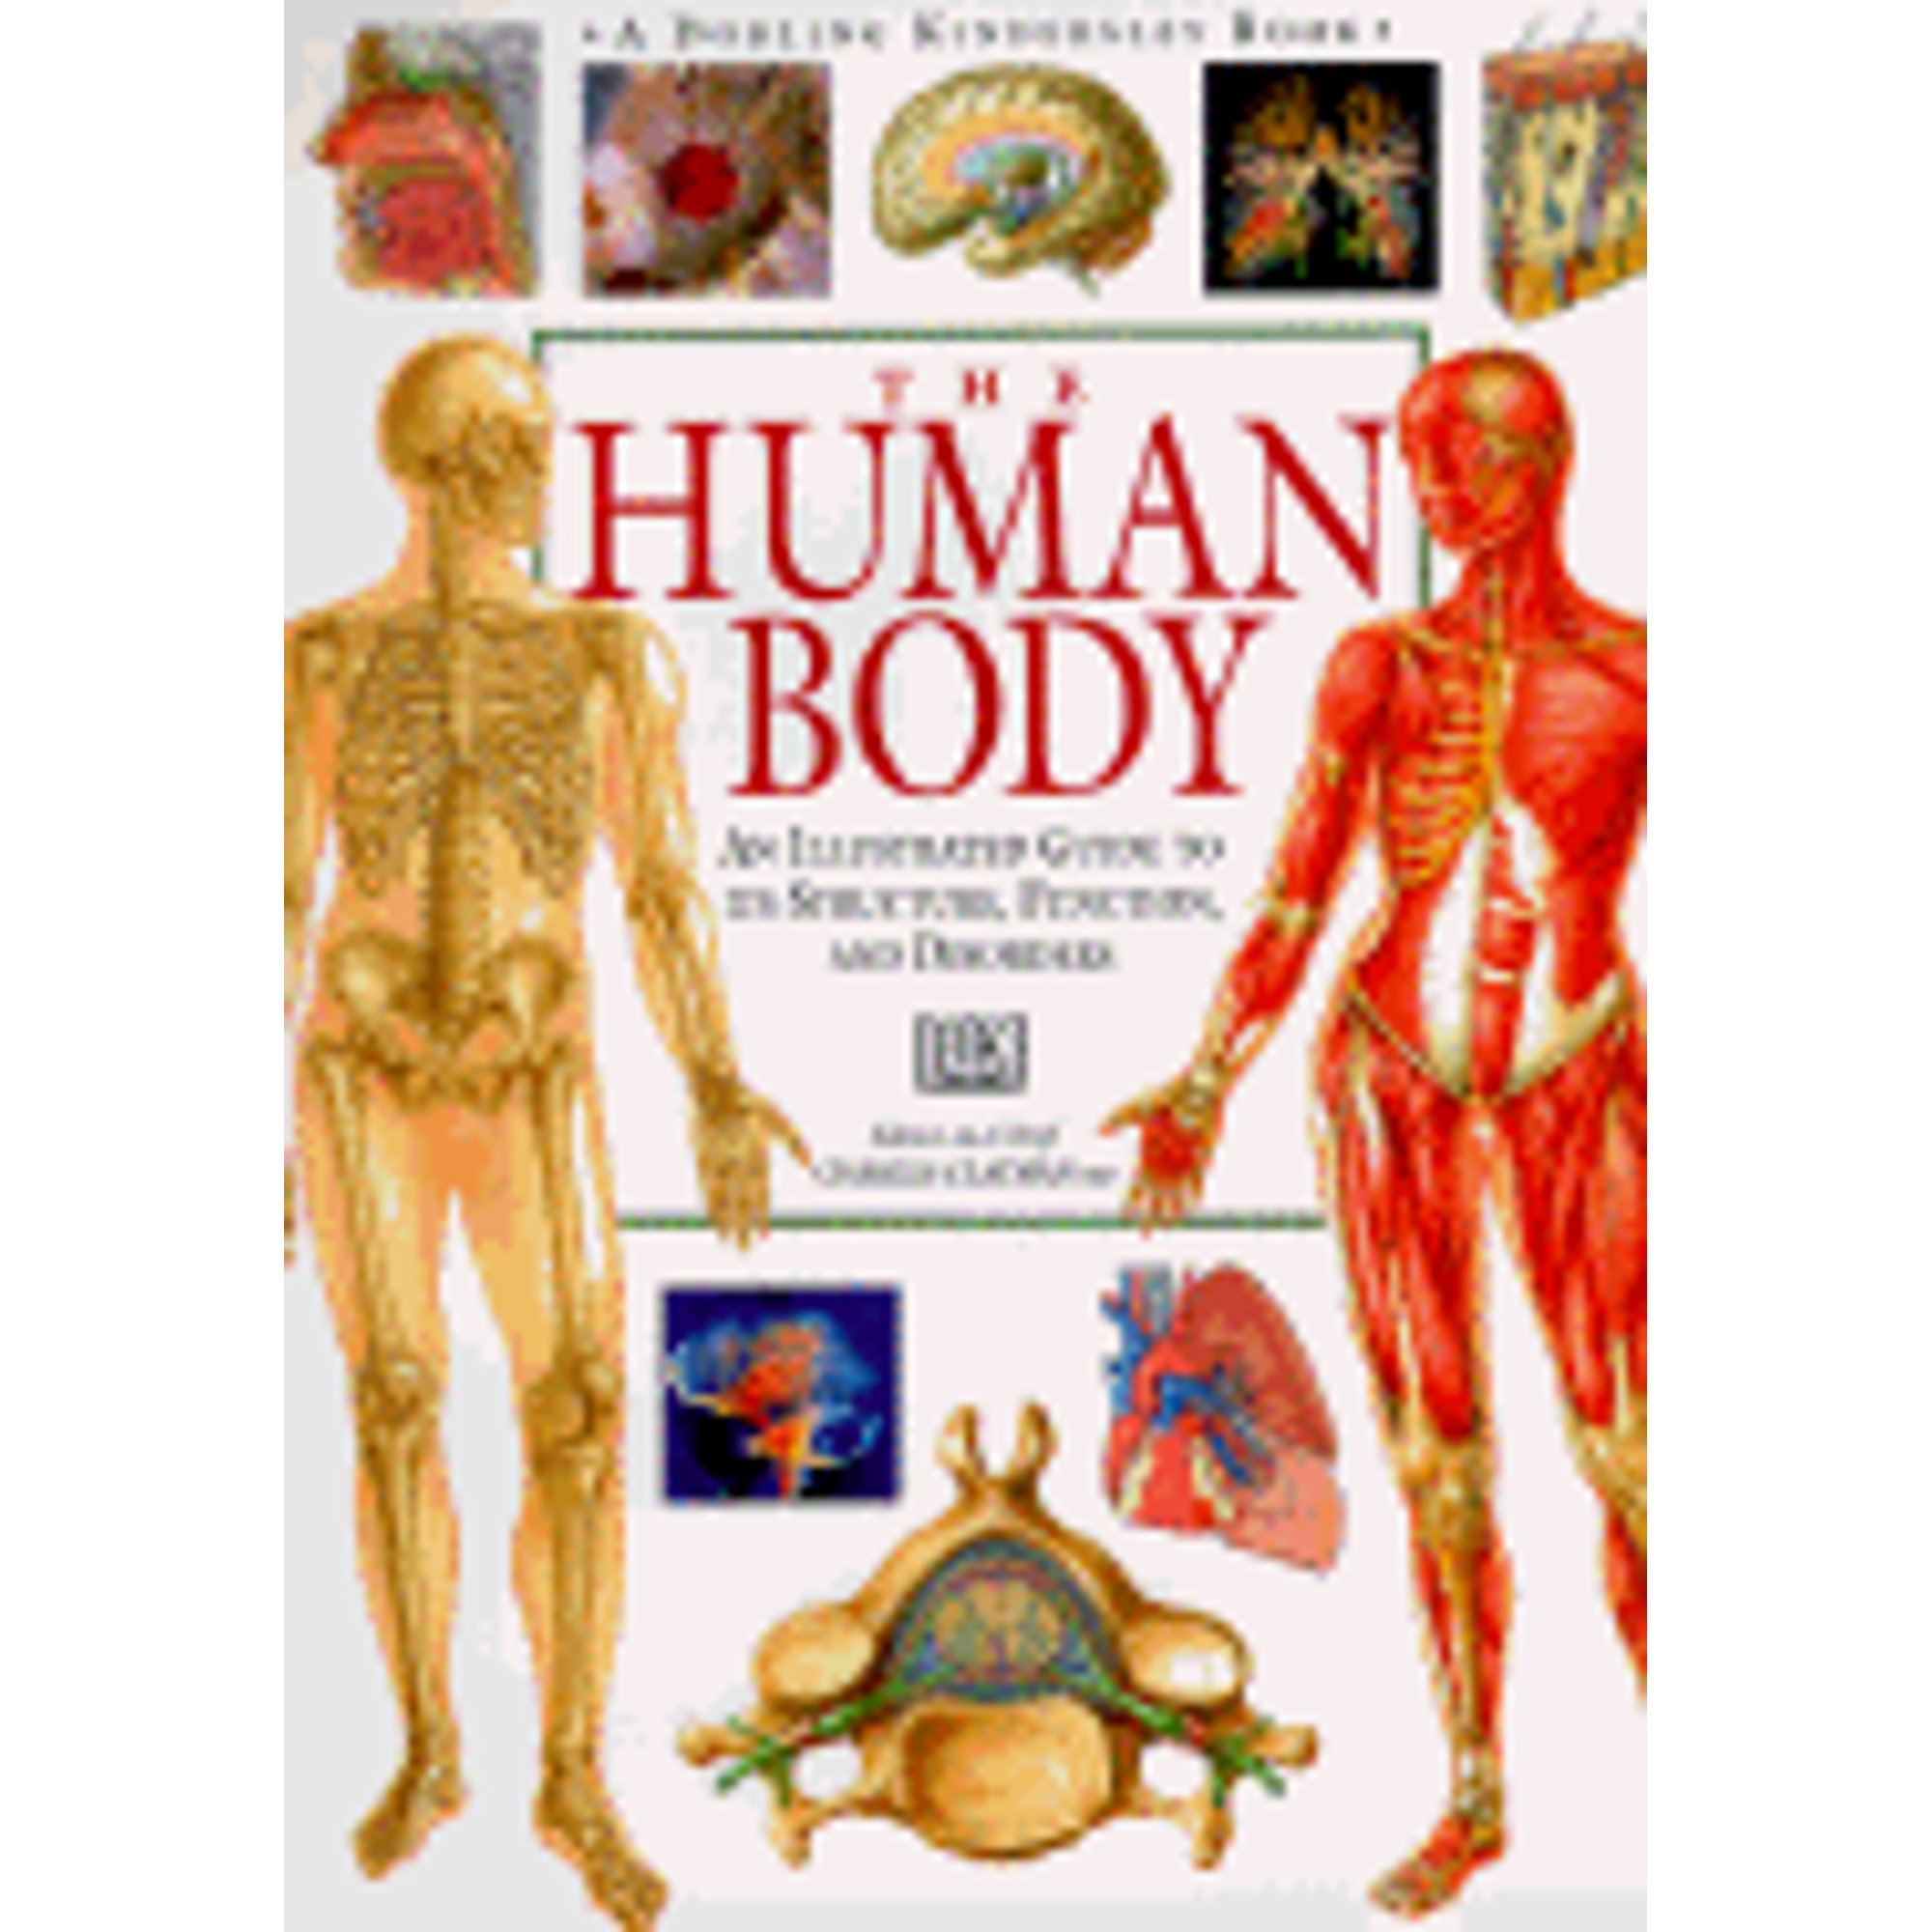 DK Complete Human Body: Visual Guide